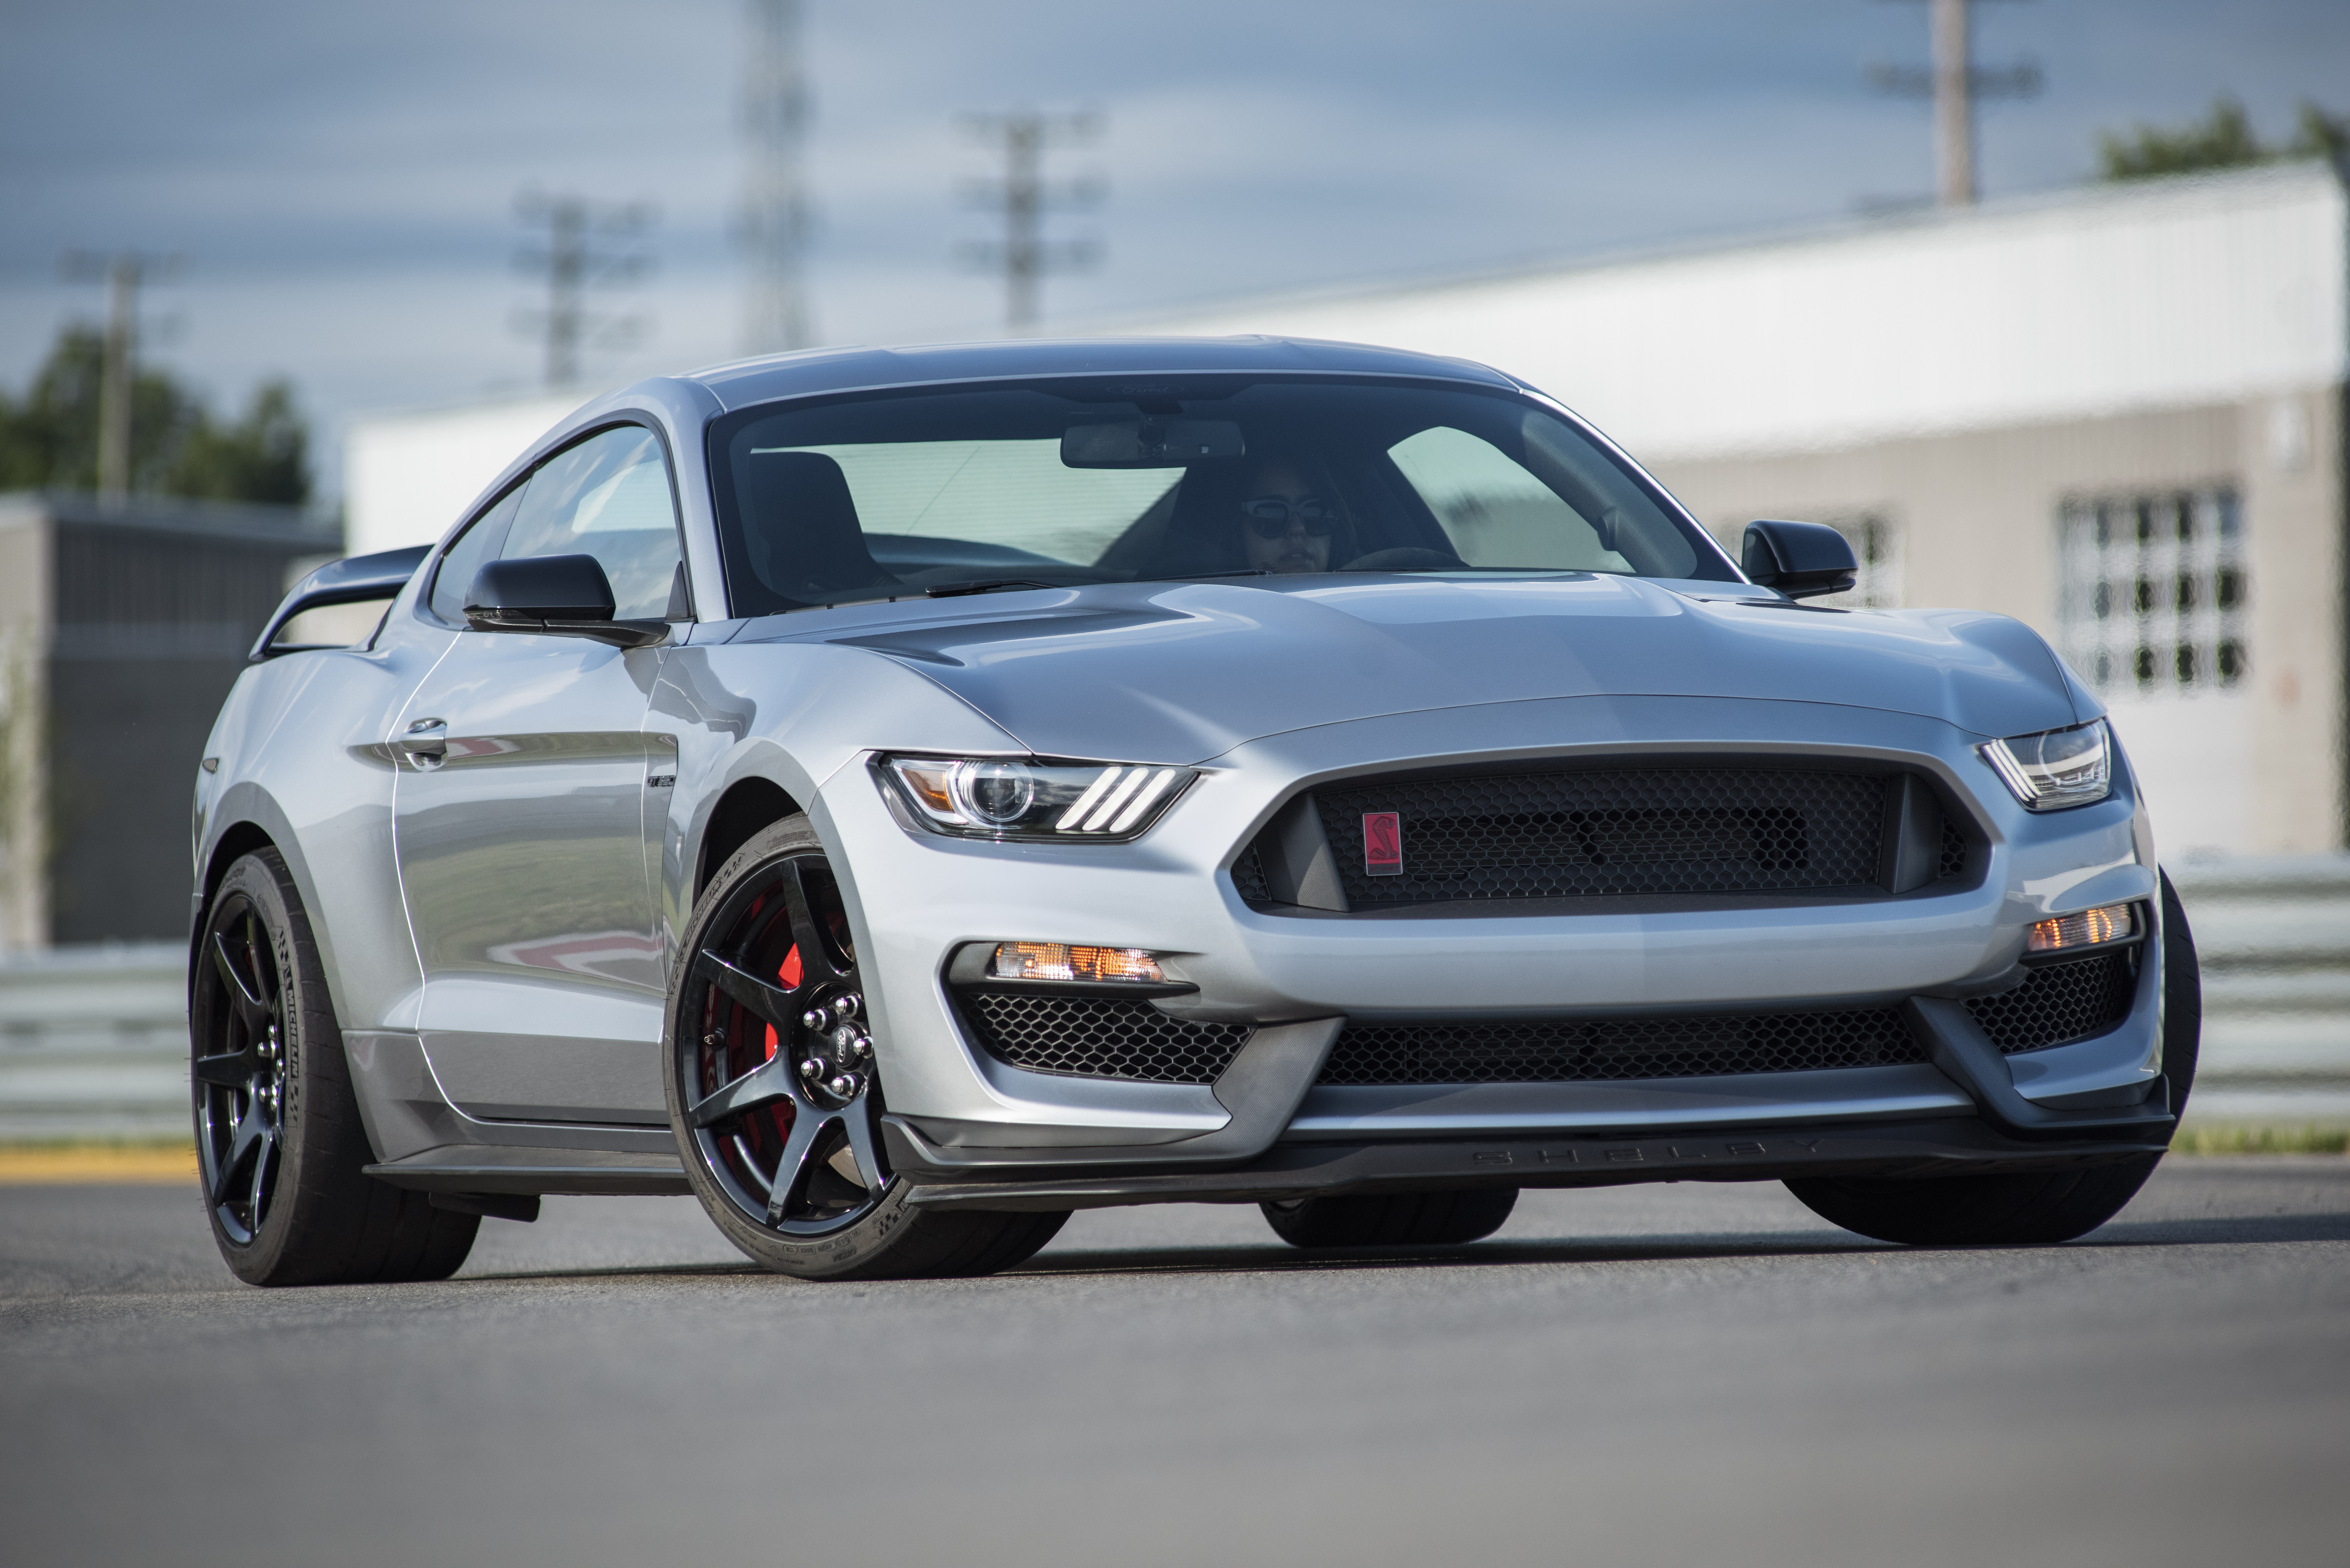 Car Ford Ford Mustang Ford Mustang Shelby Ford Mustang Shelby Gt350r Muscle Car Silver Car Vehicle 7360x4912